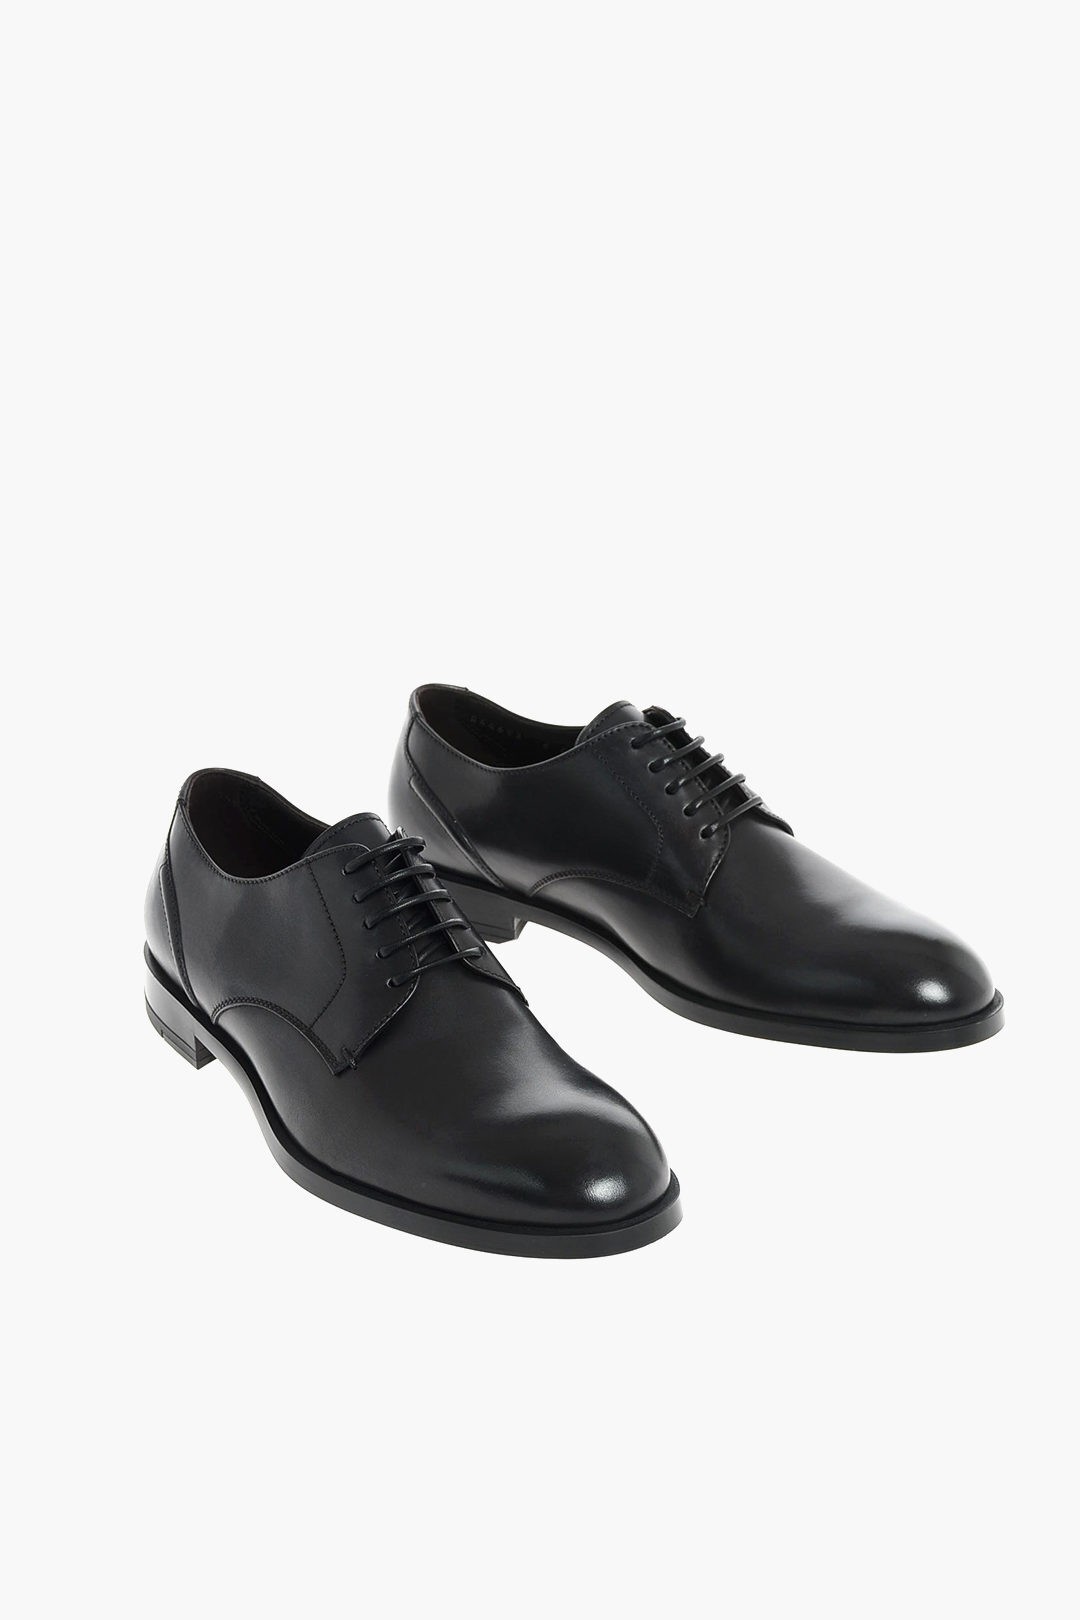 ZEGNA ゼニア ドレスシューズ A4465X LHNAX NER メンズ ZZEGNA LEATHER SIENA FLEX DERBY SHOES 【関税 送料無料】【ラッピング無料】 dk